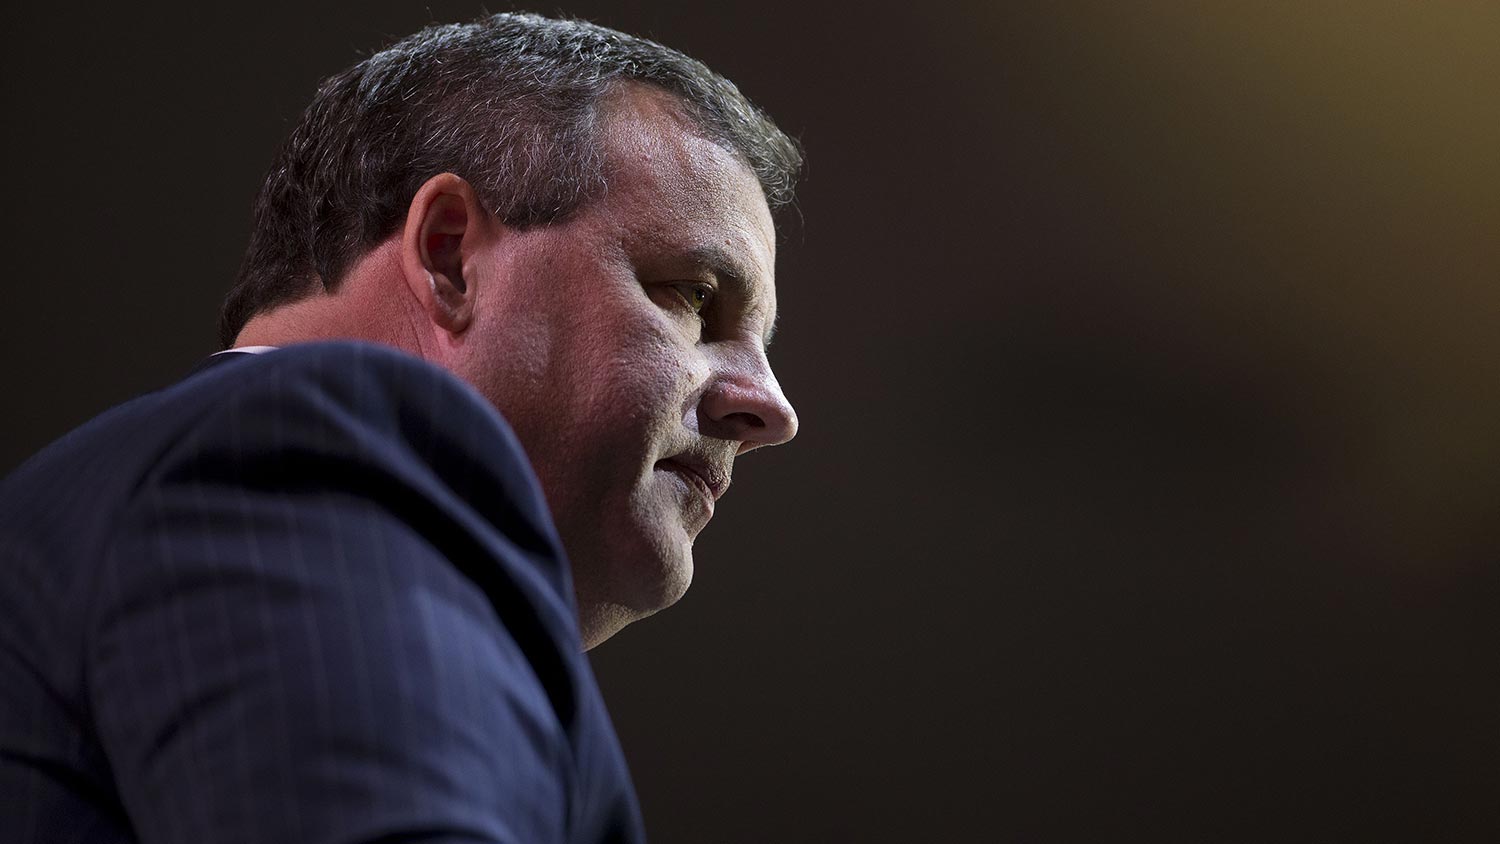 Chris Christie, governor of New Jersey, speaks during the Conservative Political Action Conference (CPAC) in National Harbor, Maryland, U.S., on Thursday, March 6, 2014.
